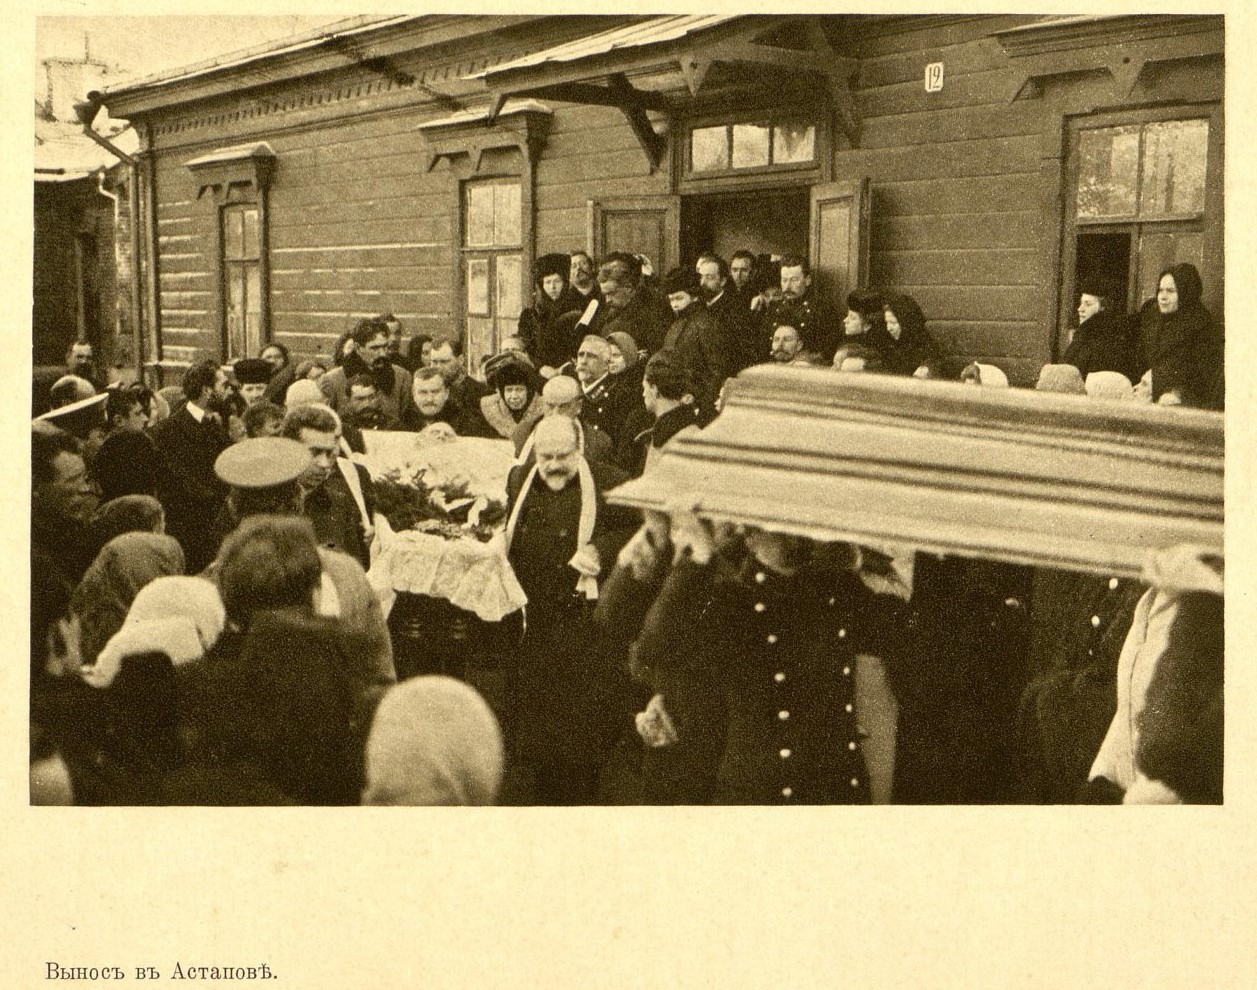 Tolstoy's body being carried out of Astapovo station, 1910